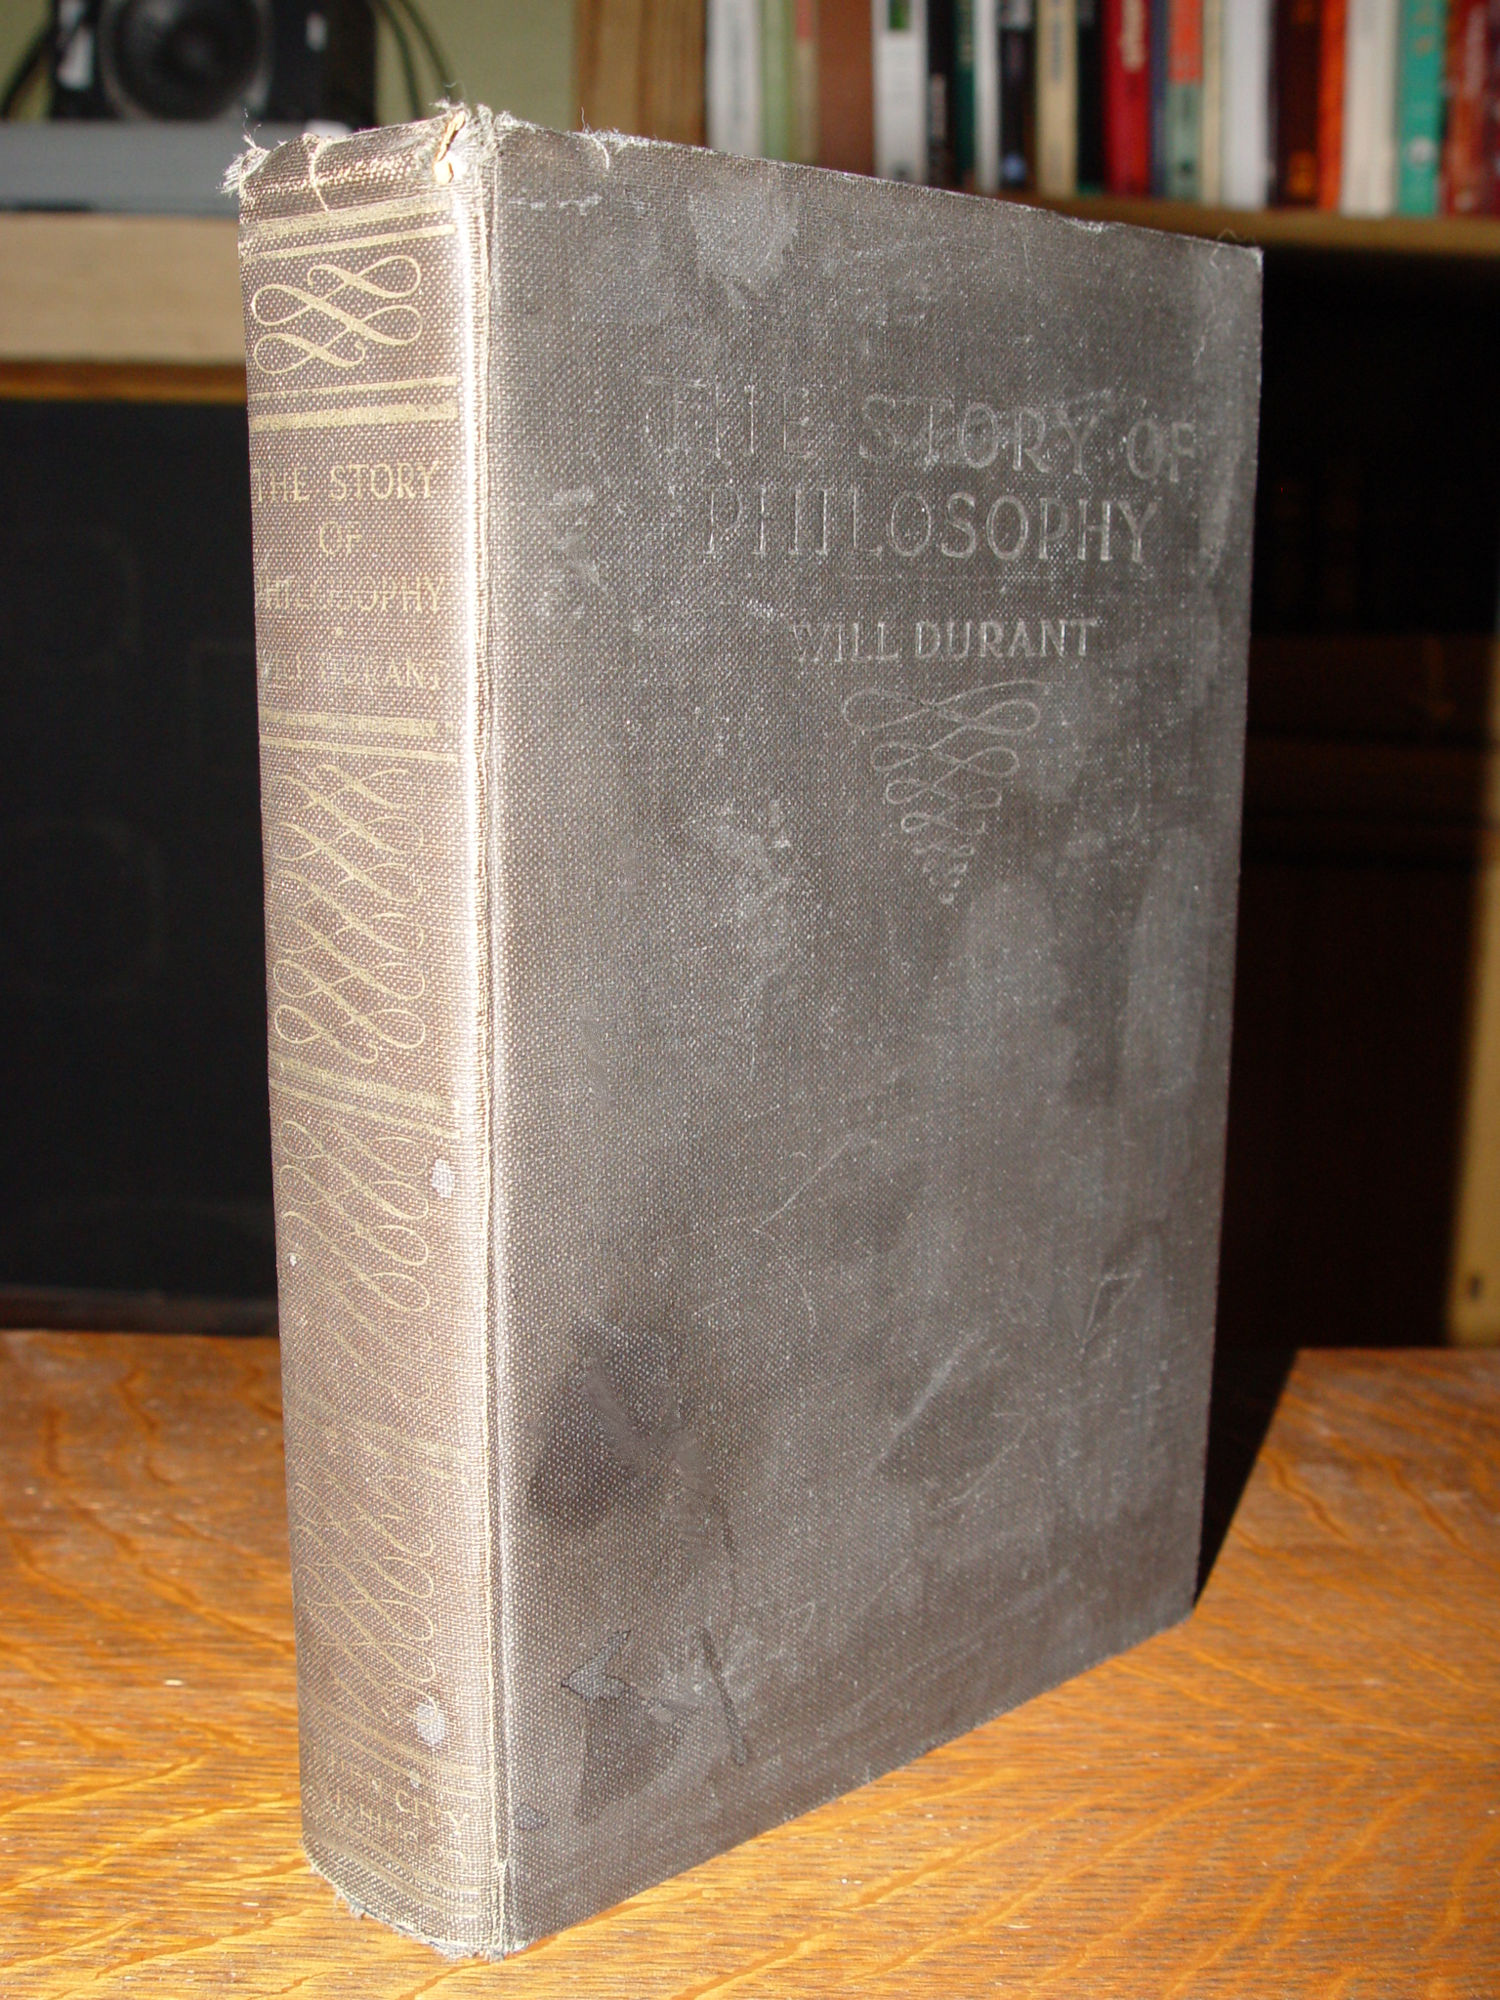 The Story of
                        Philosophy: The Lives and Opinions of the
                        Greater Philosophers 1927 Will Durant